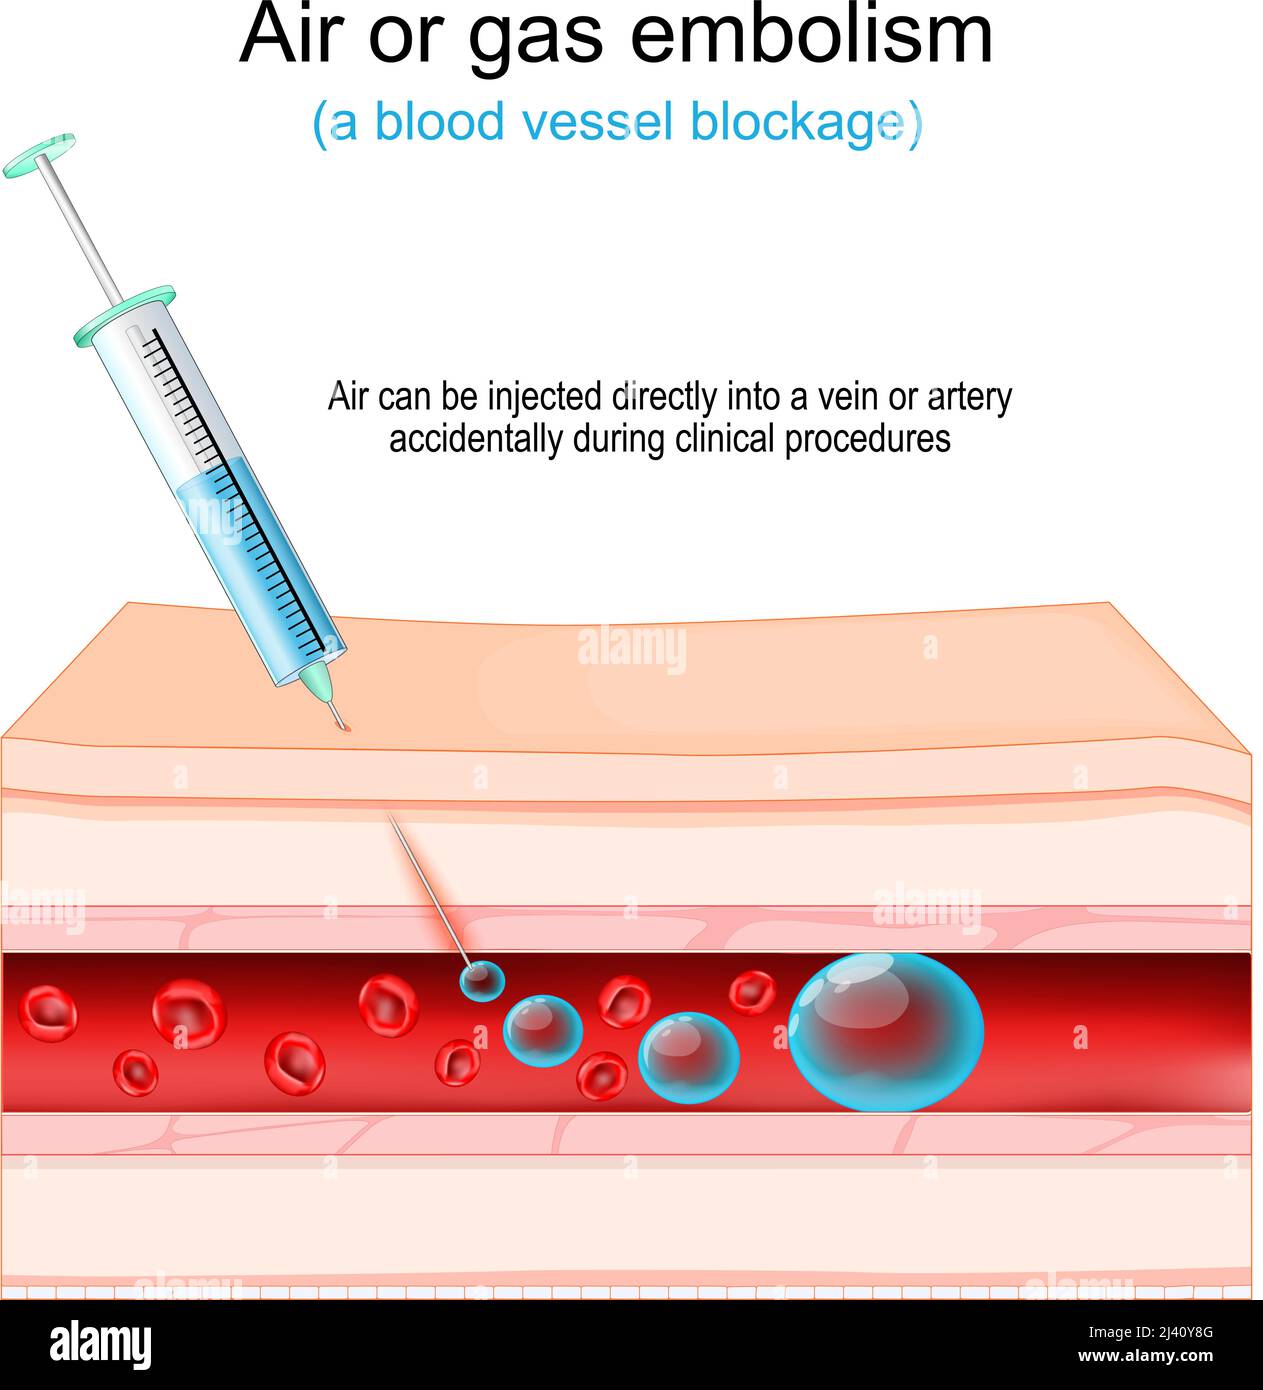 Air or gas embolism. blood vessel blockage. Air that injected directly into a vein or artery accidentally during clinical procedures. Human skin Stock Vector